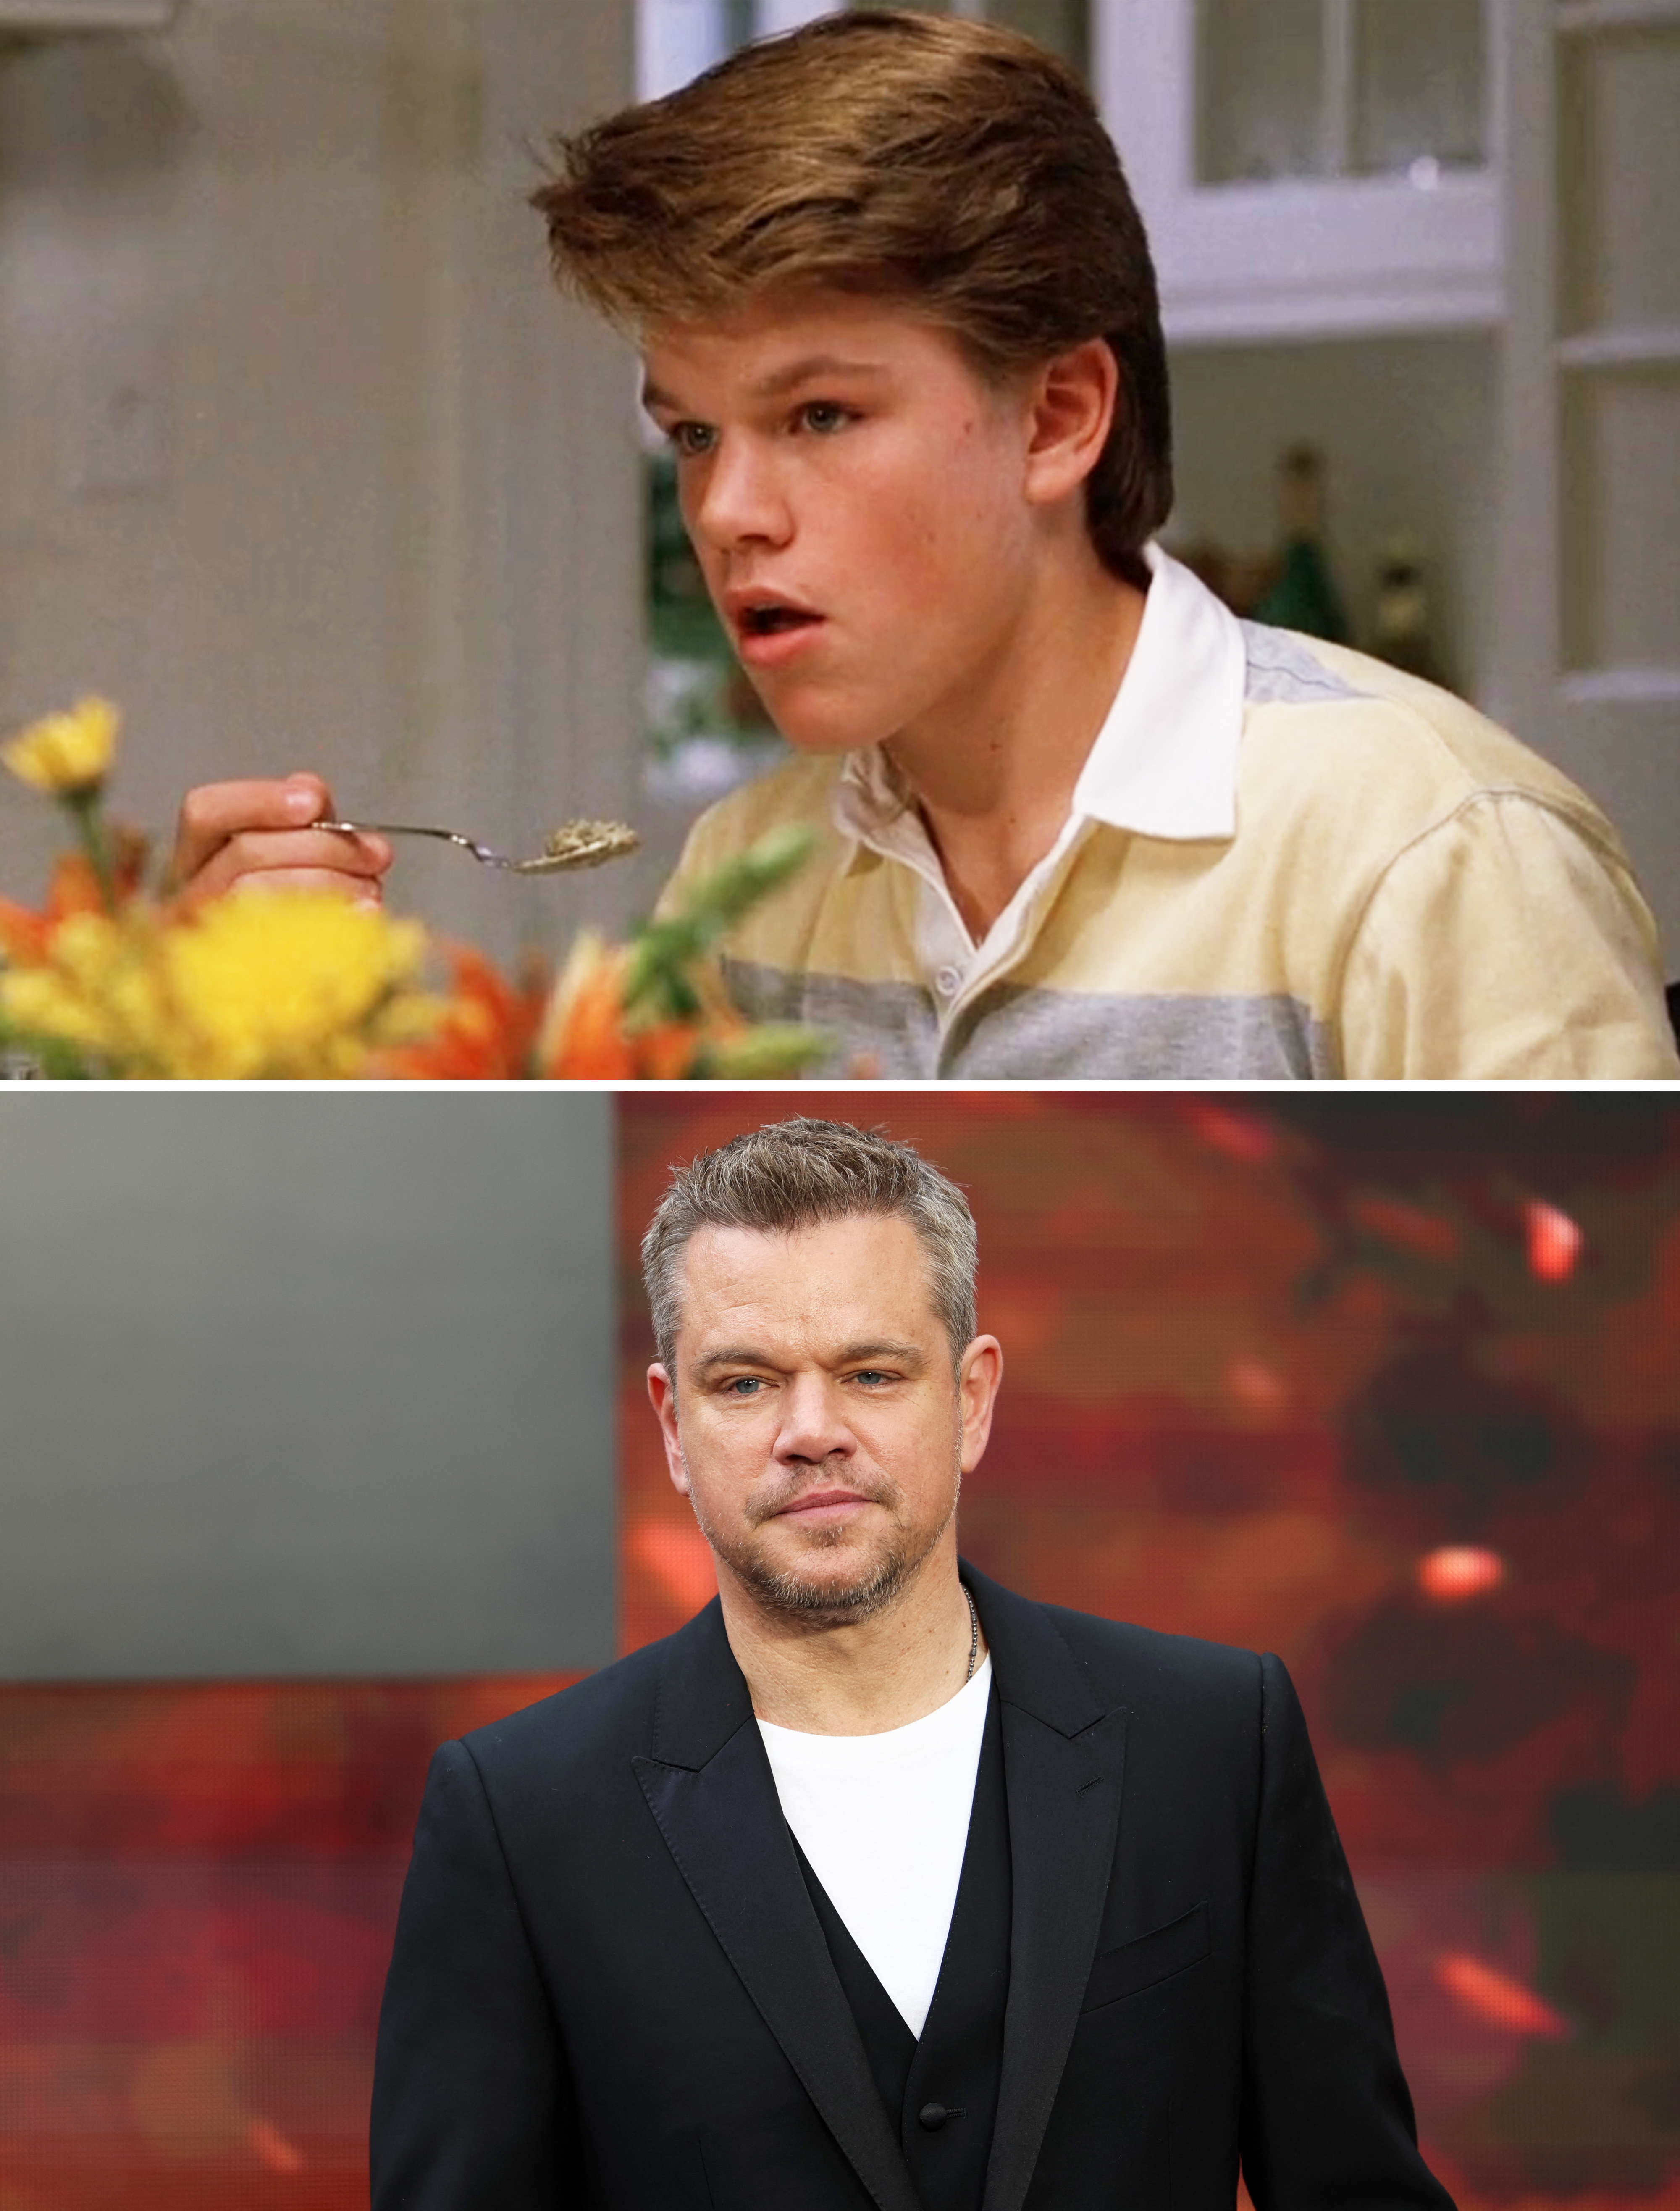 Matt in a scene from the movie and in a close-up at a media event